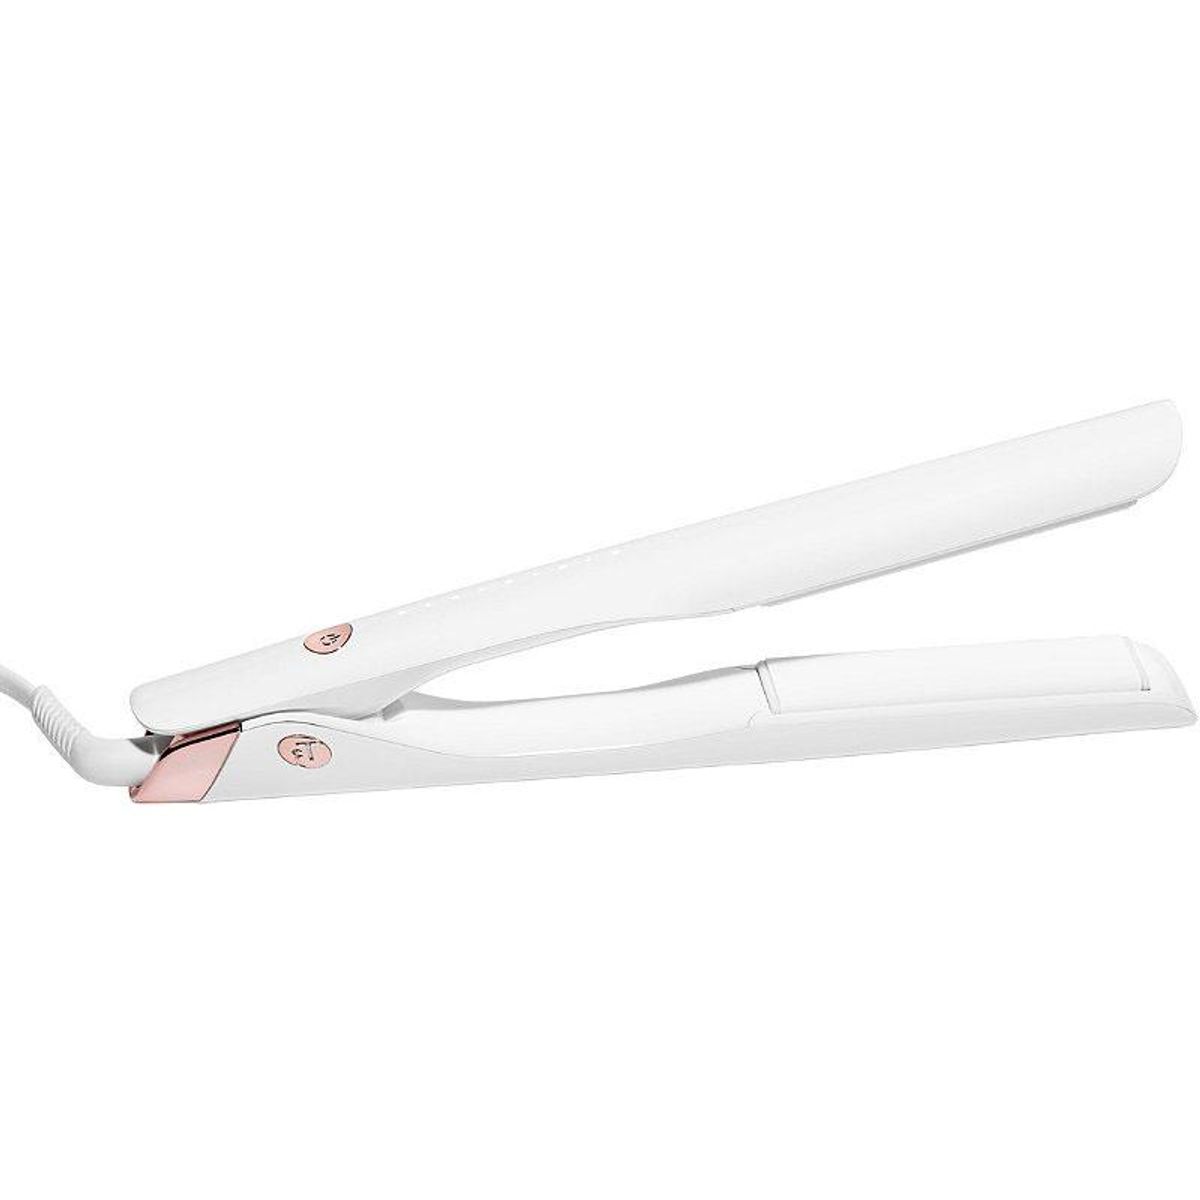 t3 lucea 1 inch professional straightening and styling flat iron